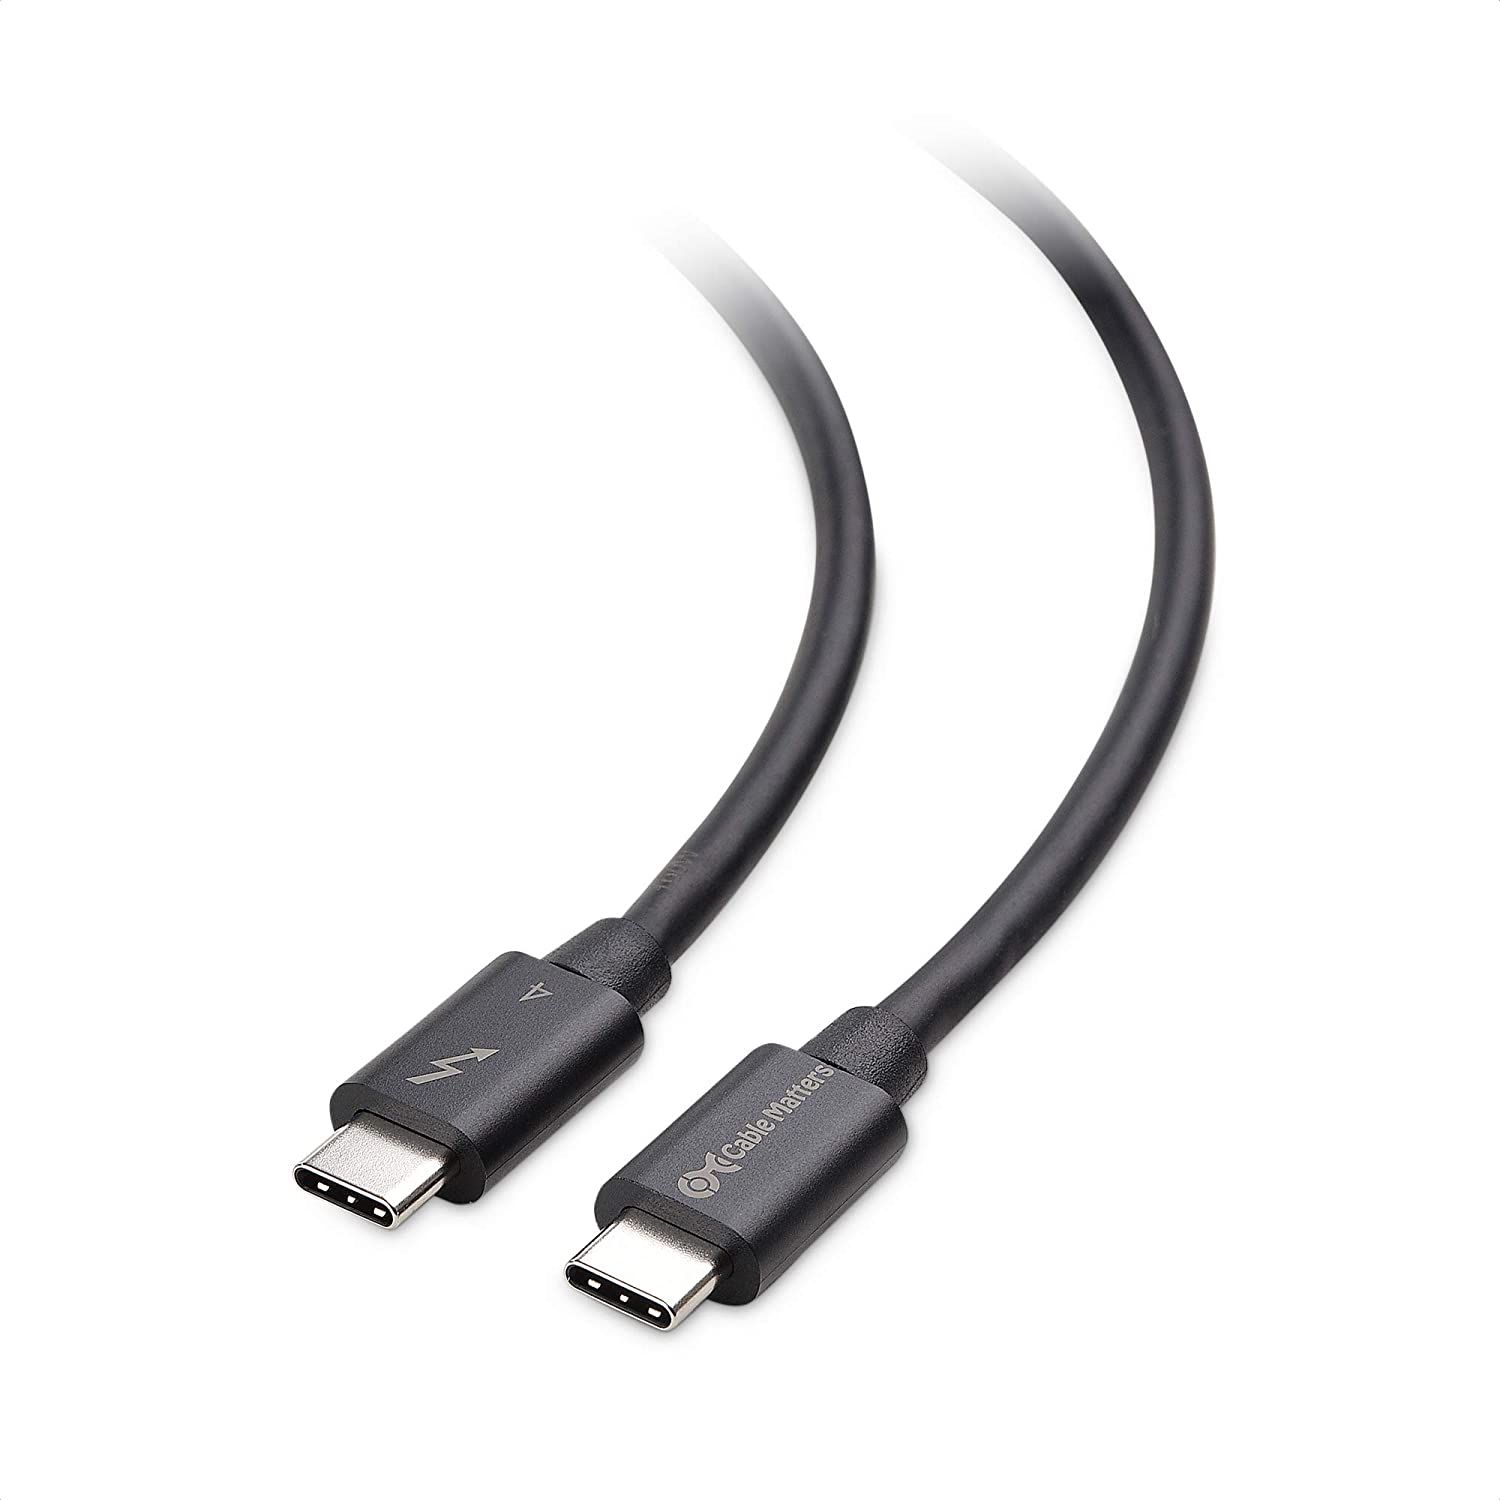 OWC Thunderbolt 4 / USB-C Cables Released – One Cable for All Standards